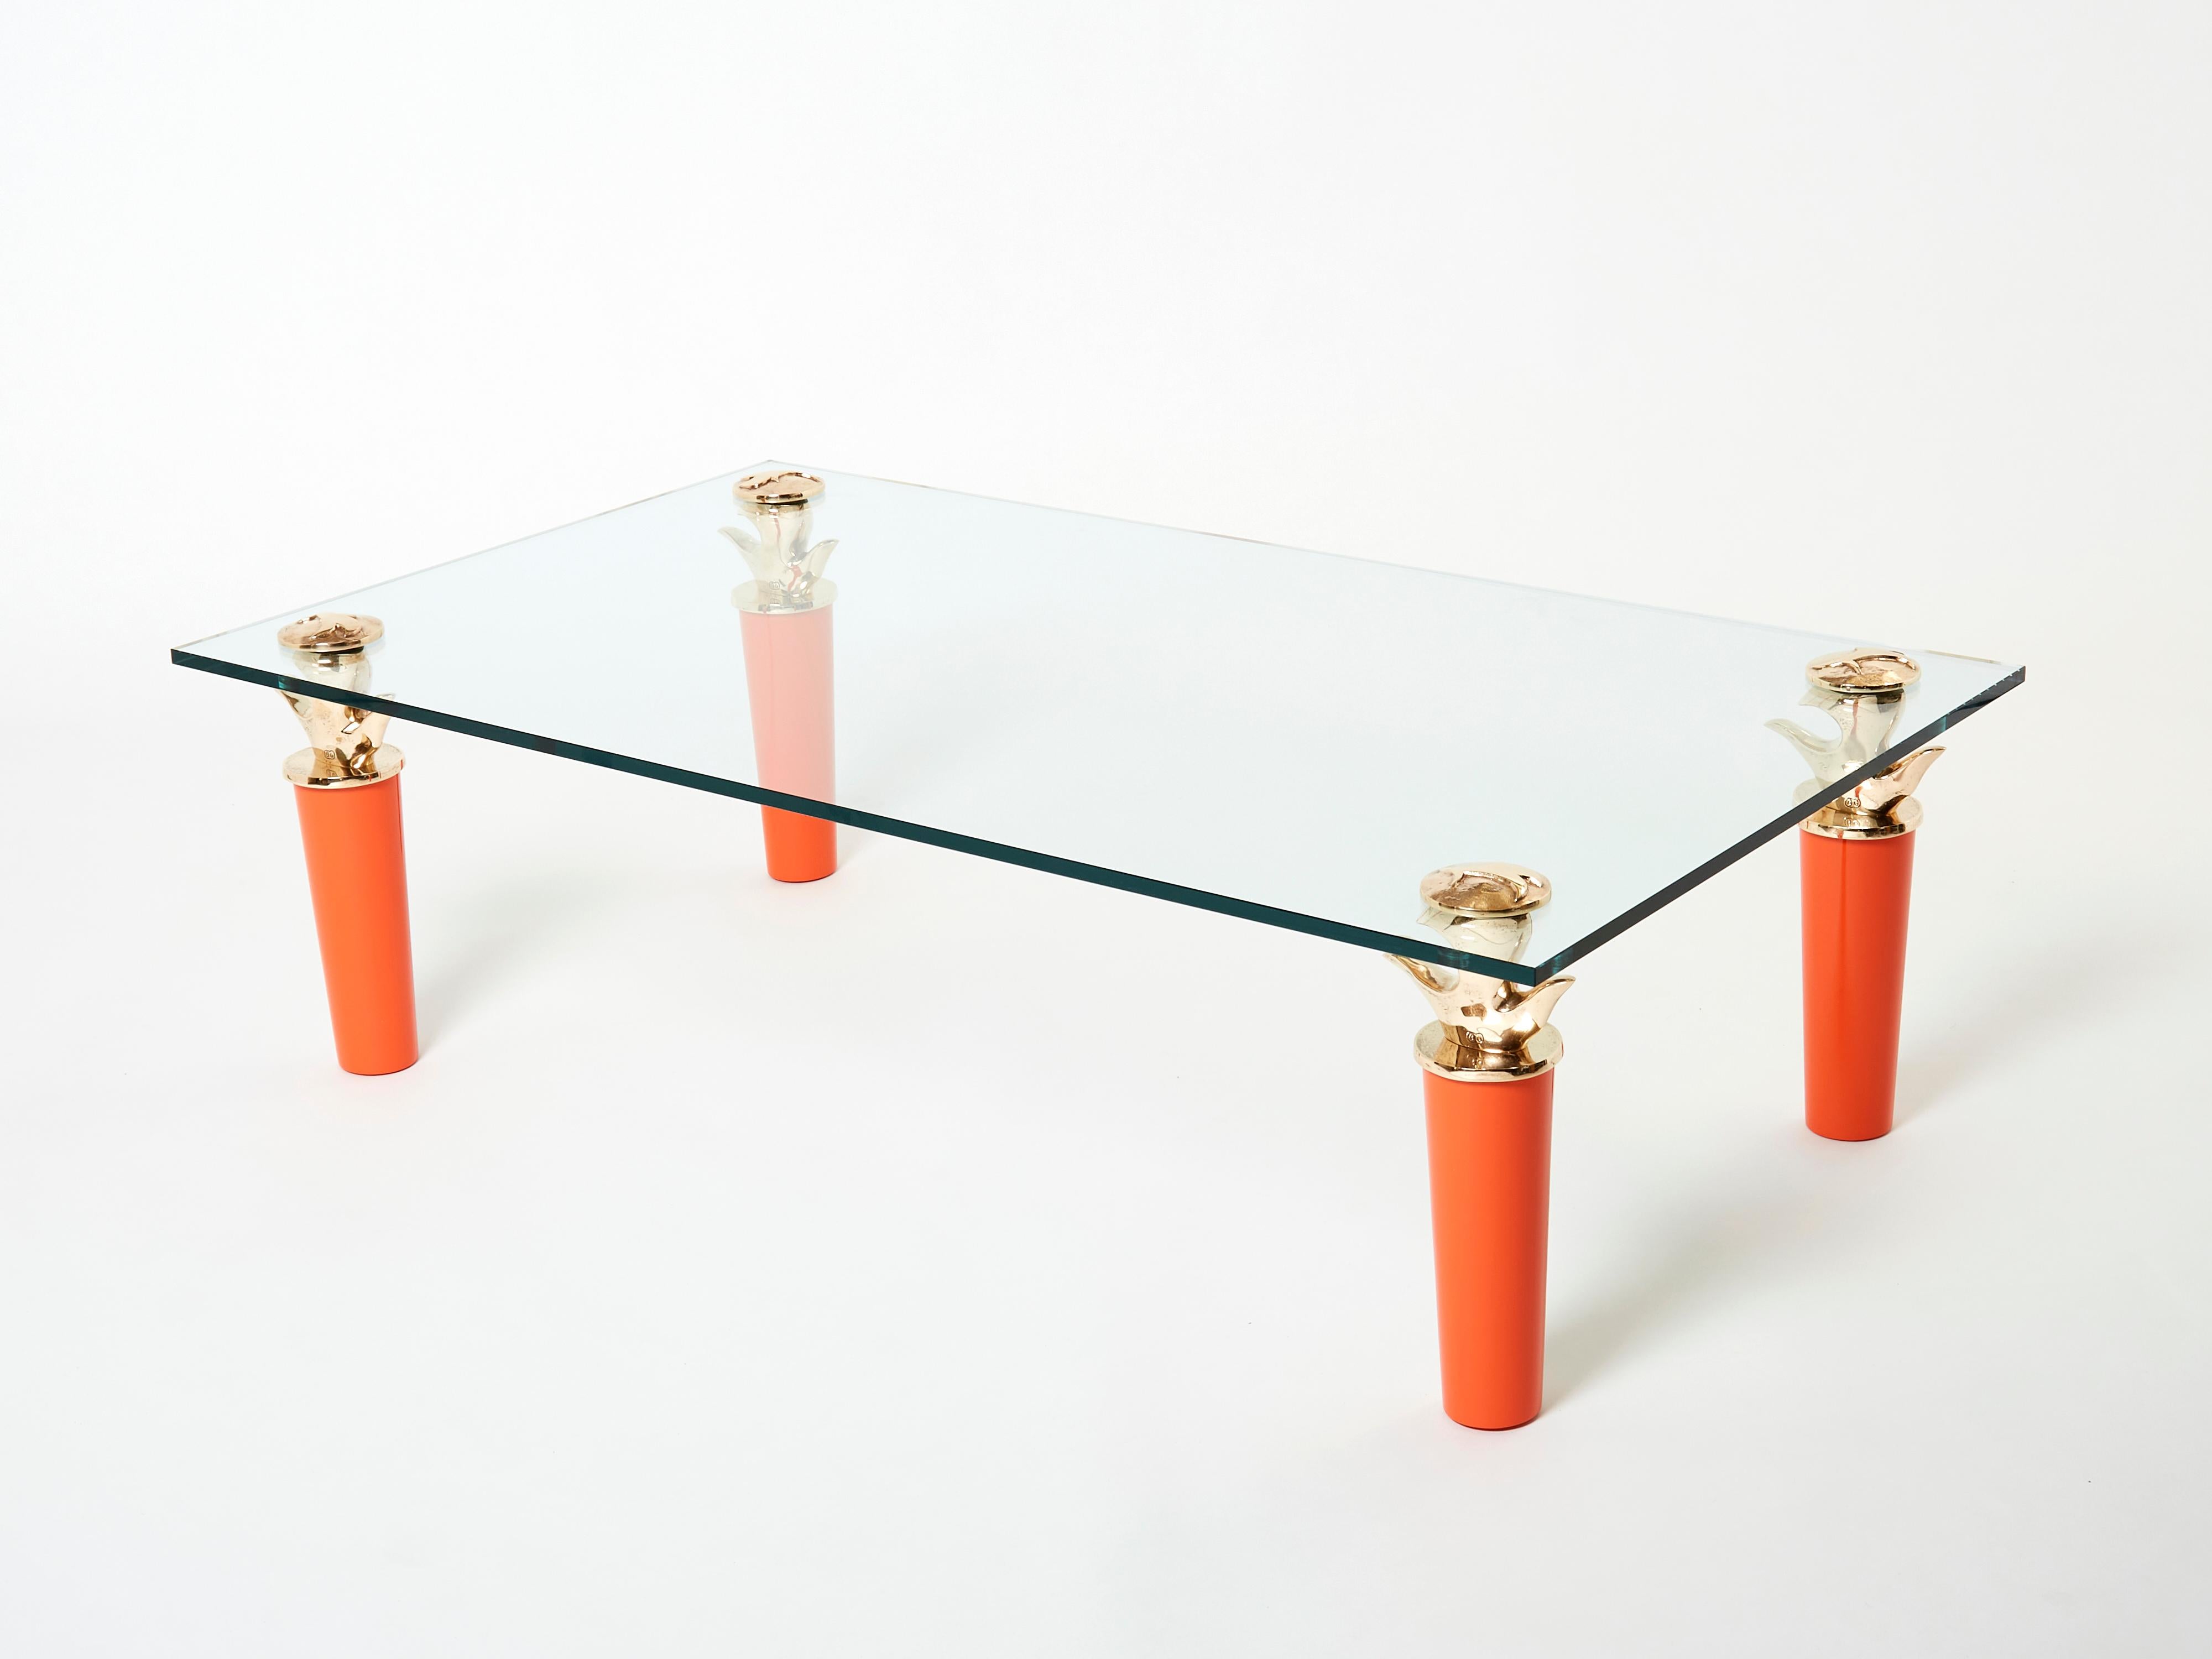 Rare signed coffee table by Elizabeth Garouste & Mattia Bonetti, model Concerto, designed and made in 1995 by the iconic duo. The large feet are made in beautiful orange lacquered wood topped by gilt bronze elements, all stamped BG. This is clearly